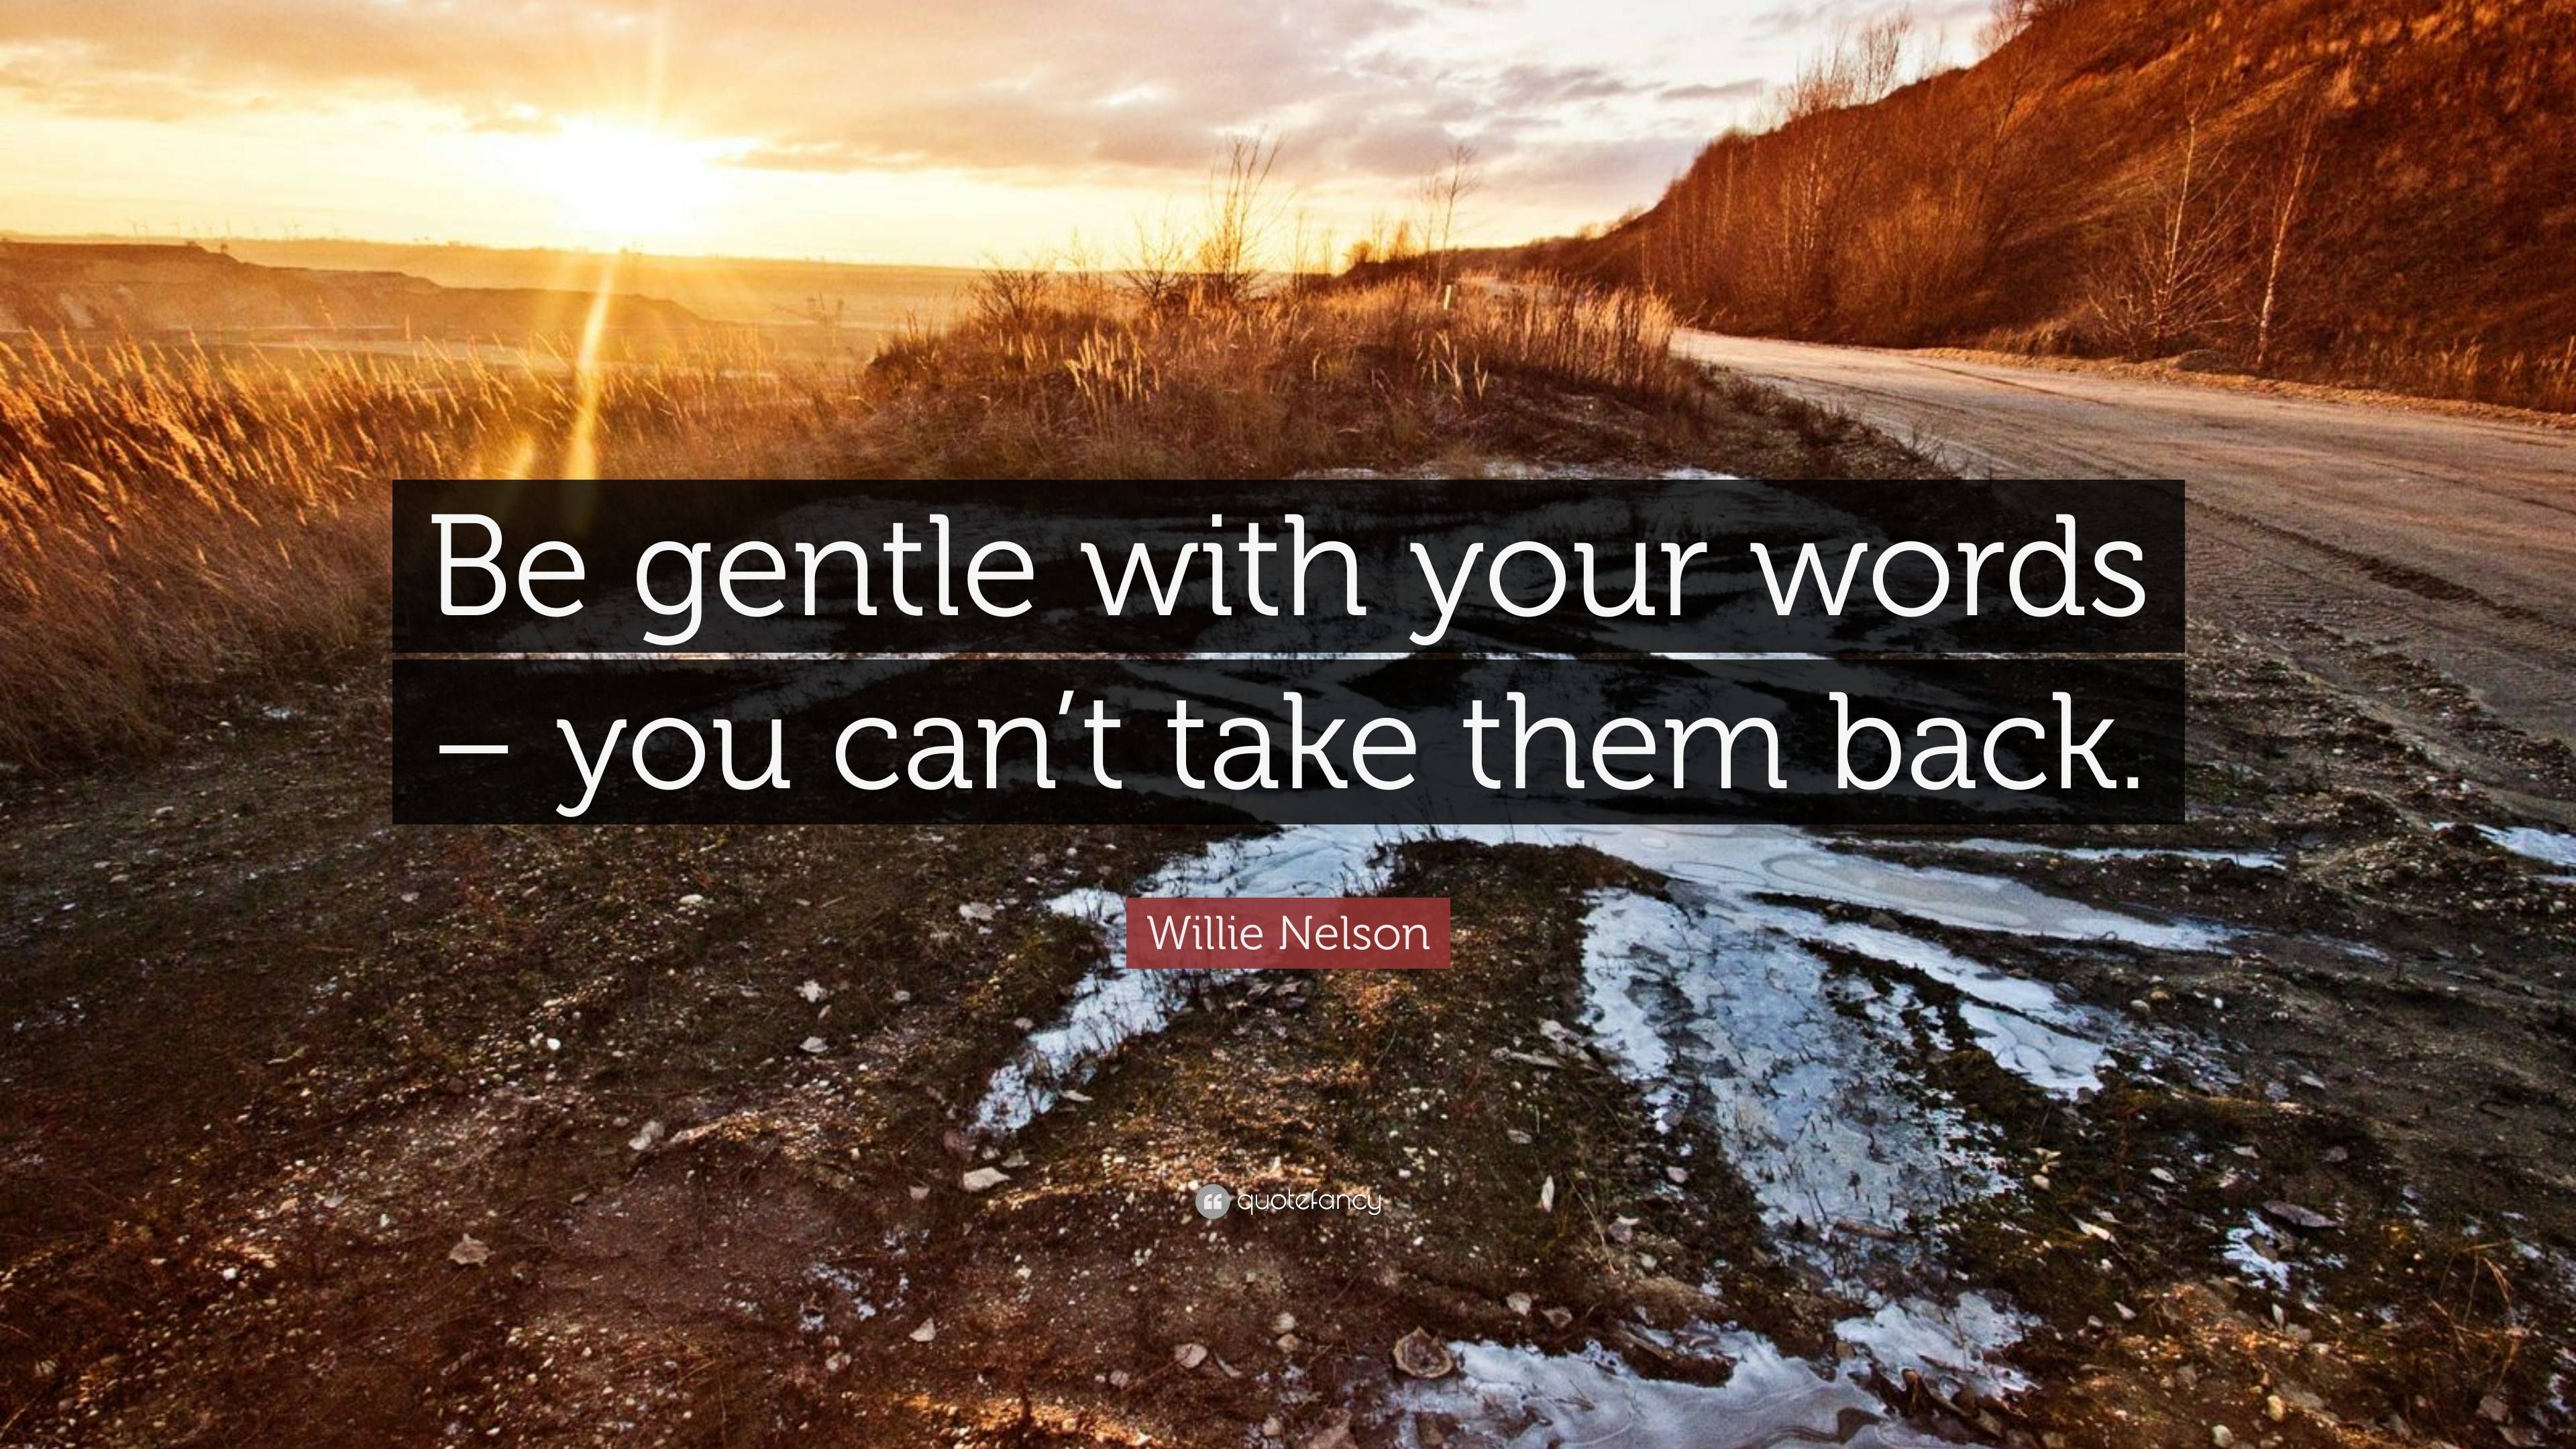 3840x2160 Willie Nelson Quote: “Be gentle with your words – you can't take